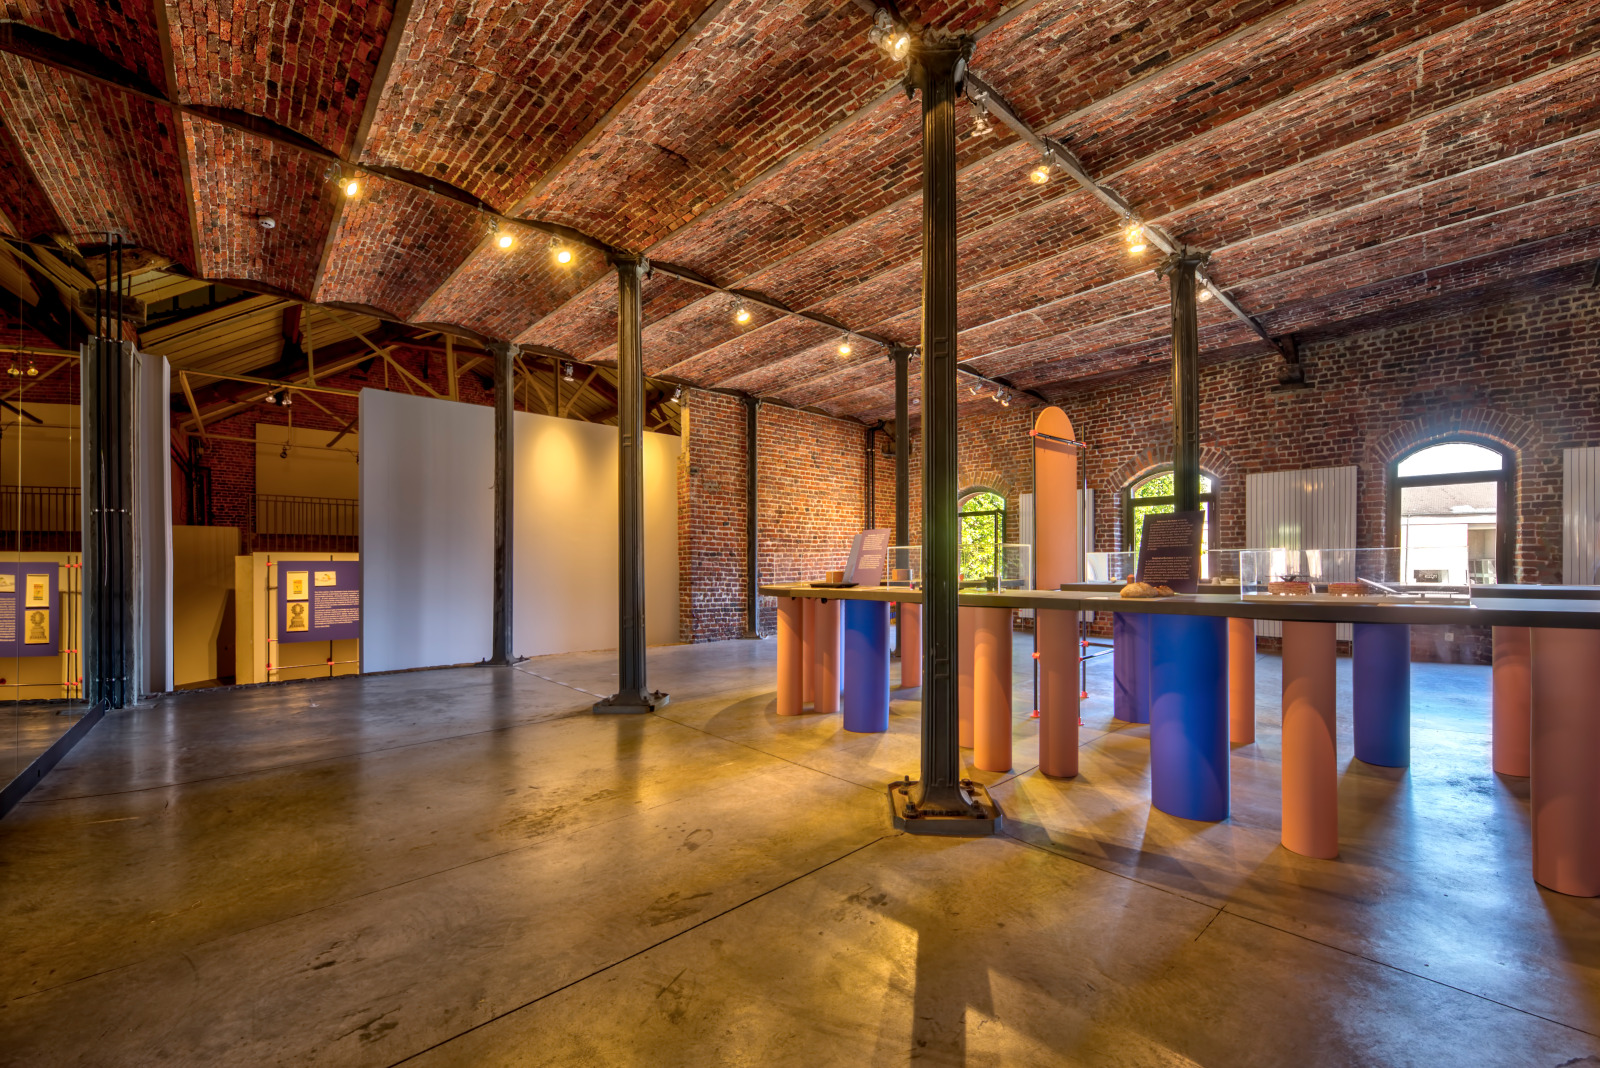 Red brick vaulted interior room of the Innovation and Design Center at Grand-Hornu